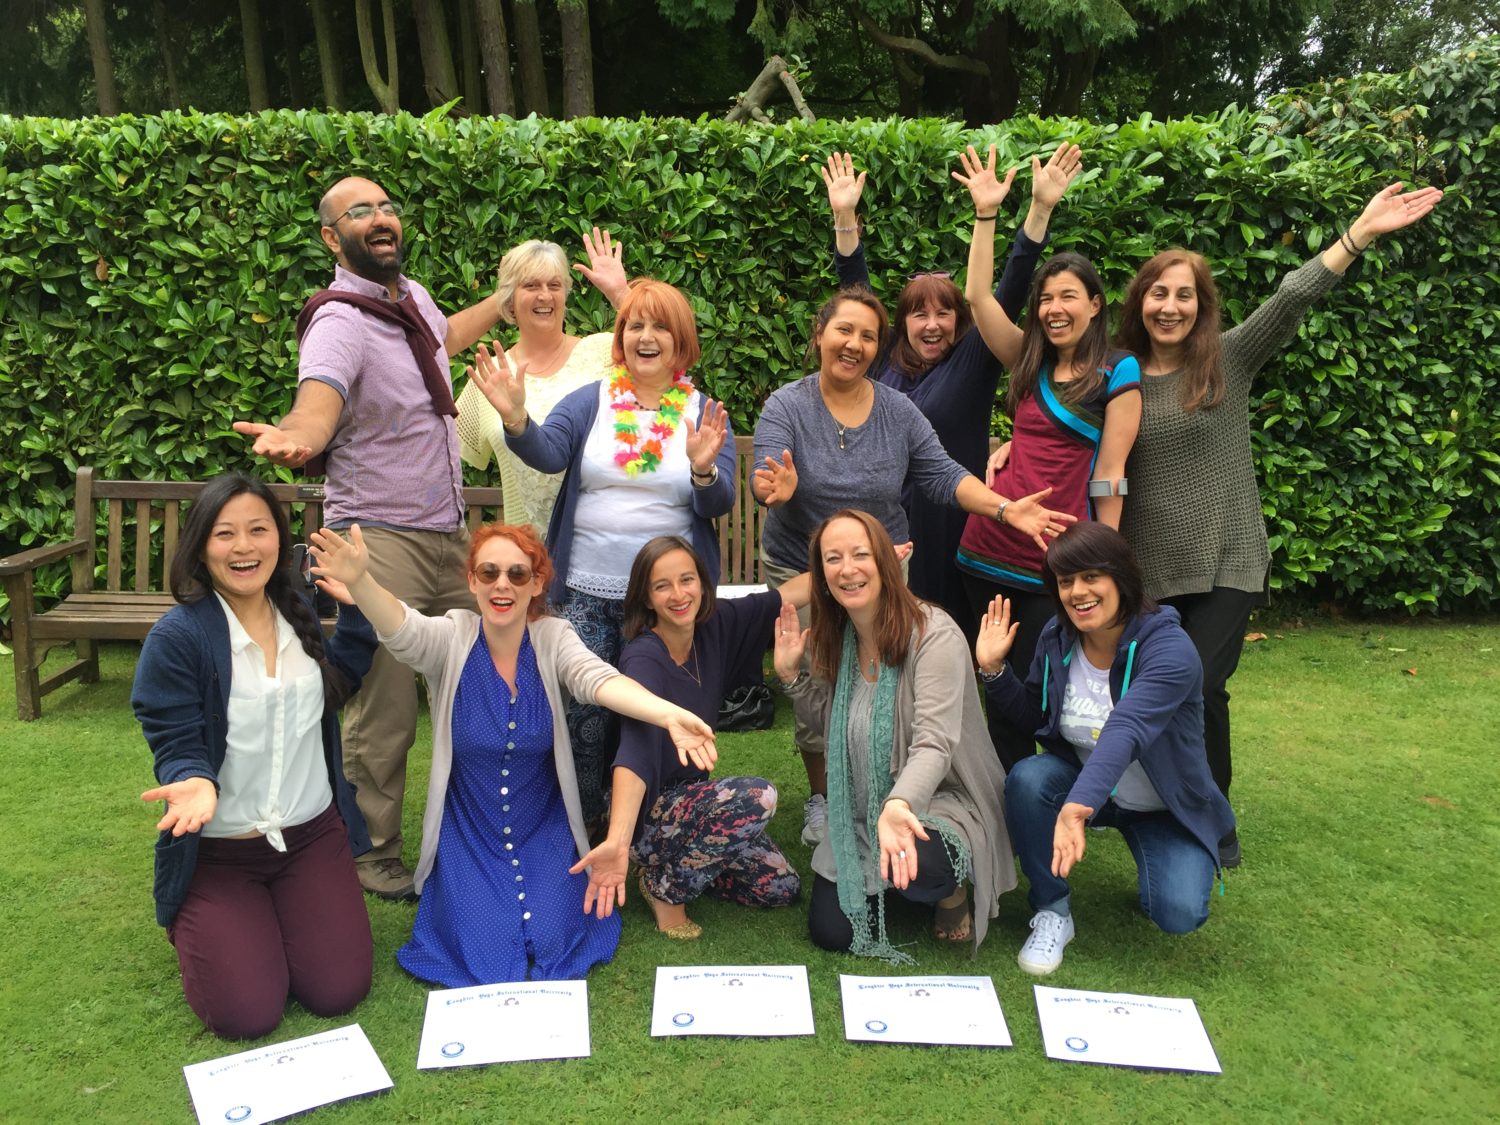 2016 07 Laughter Yoga Teacher Training 52 e1487002169952 - Corporate Laughter Yoga Training & Workshop Specialists in the UK | Corporate Wellness & Workplace Wellbeing Programmes, Trainings & Workshops in London UK with Laughter Yoga Expert Lotte Mikkelsen